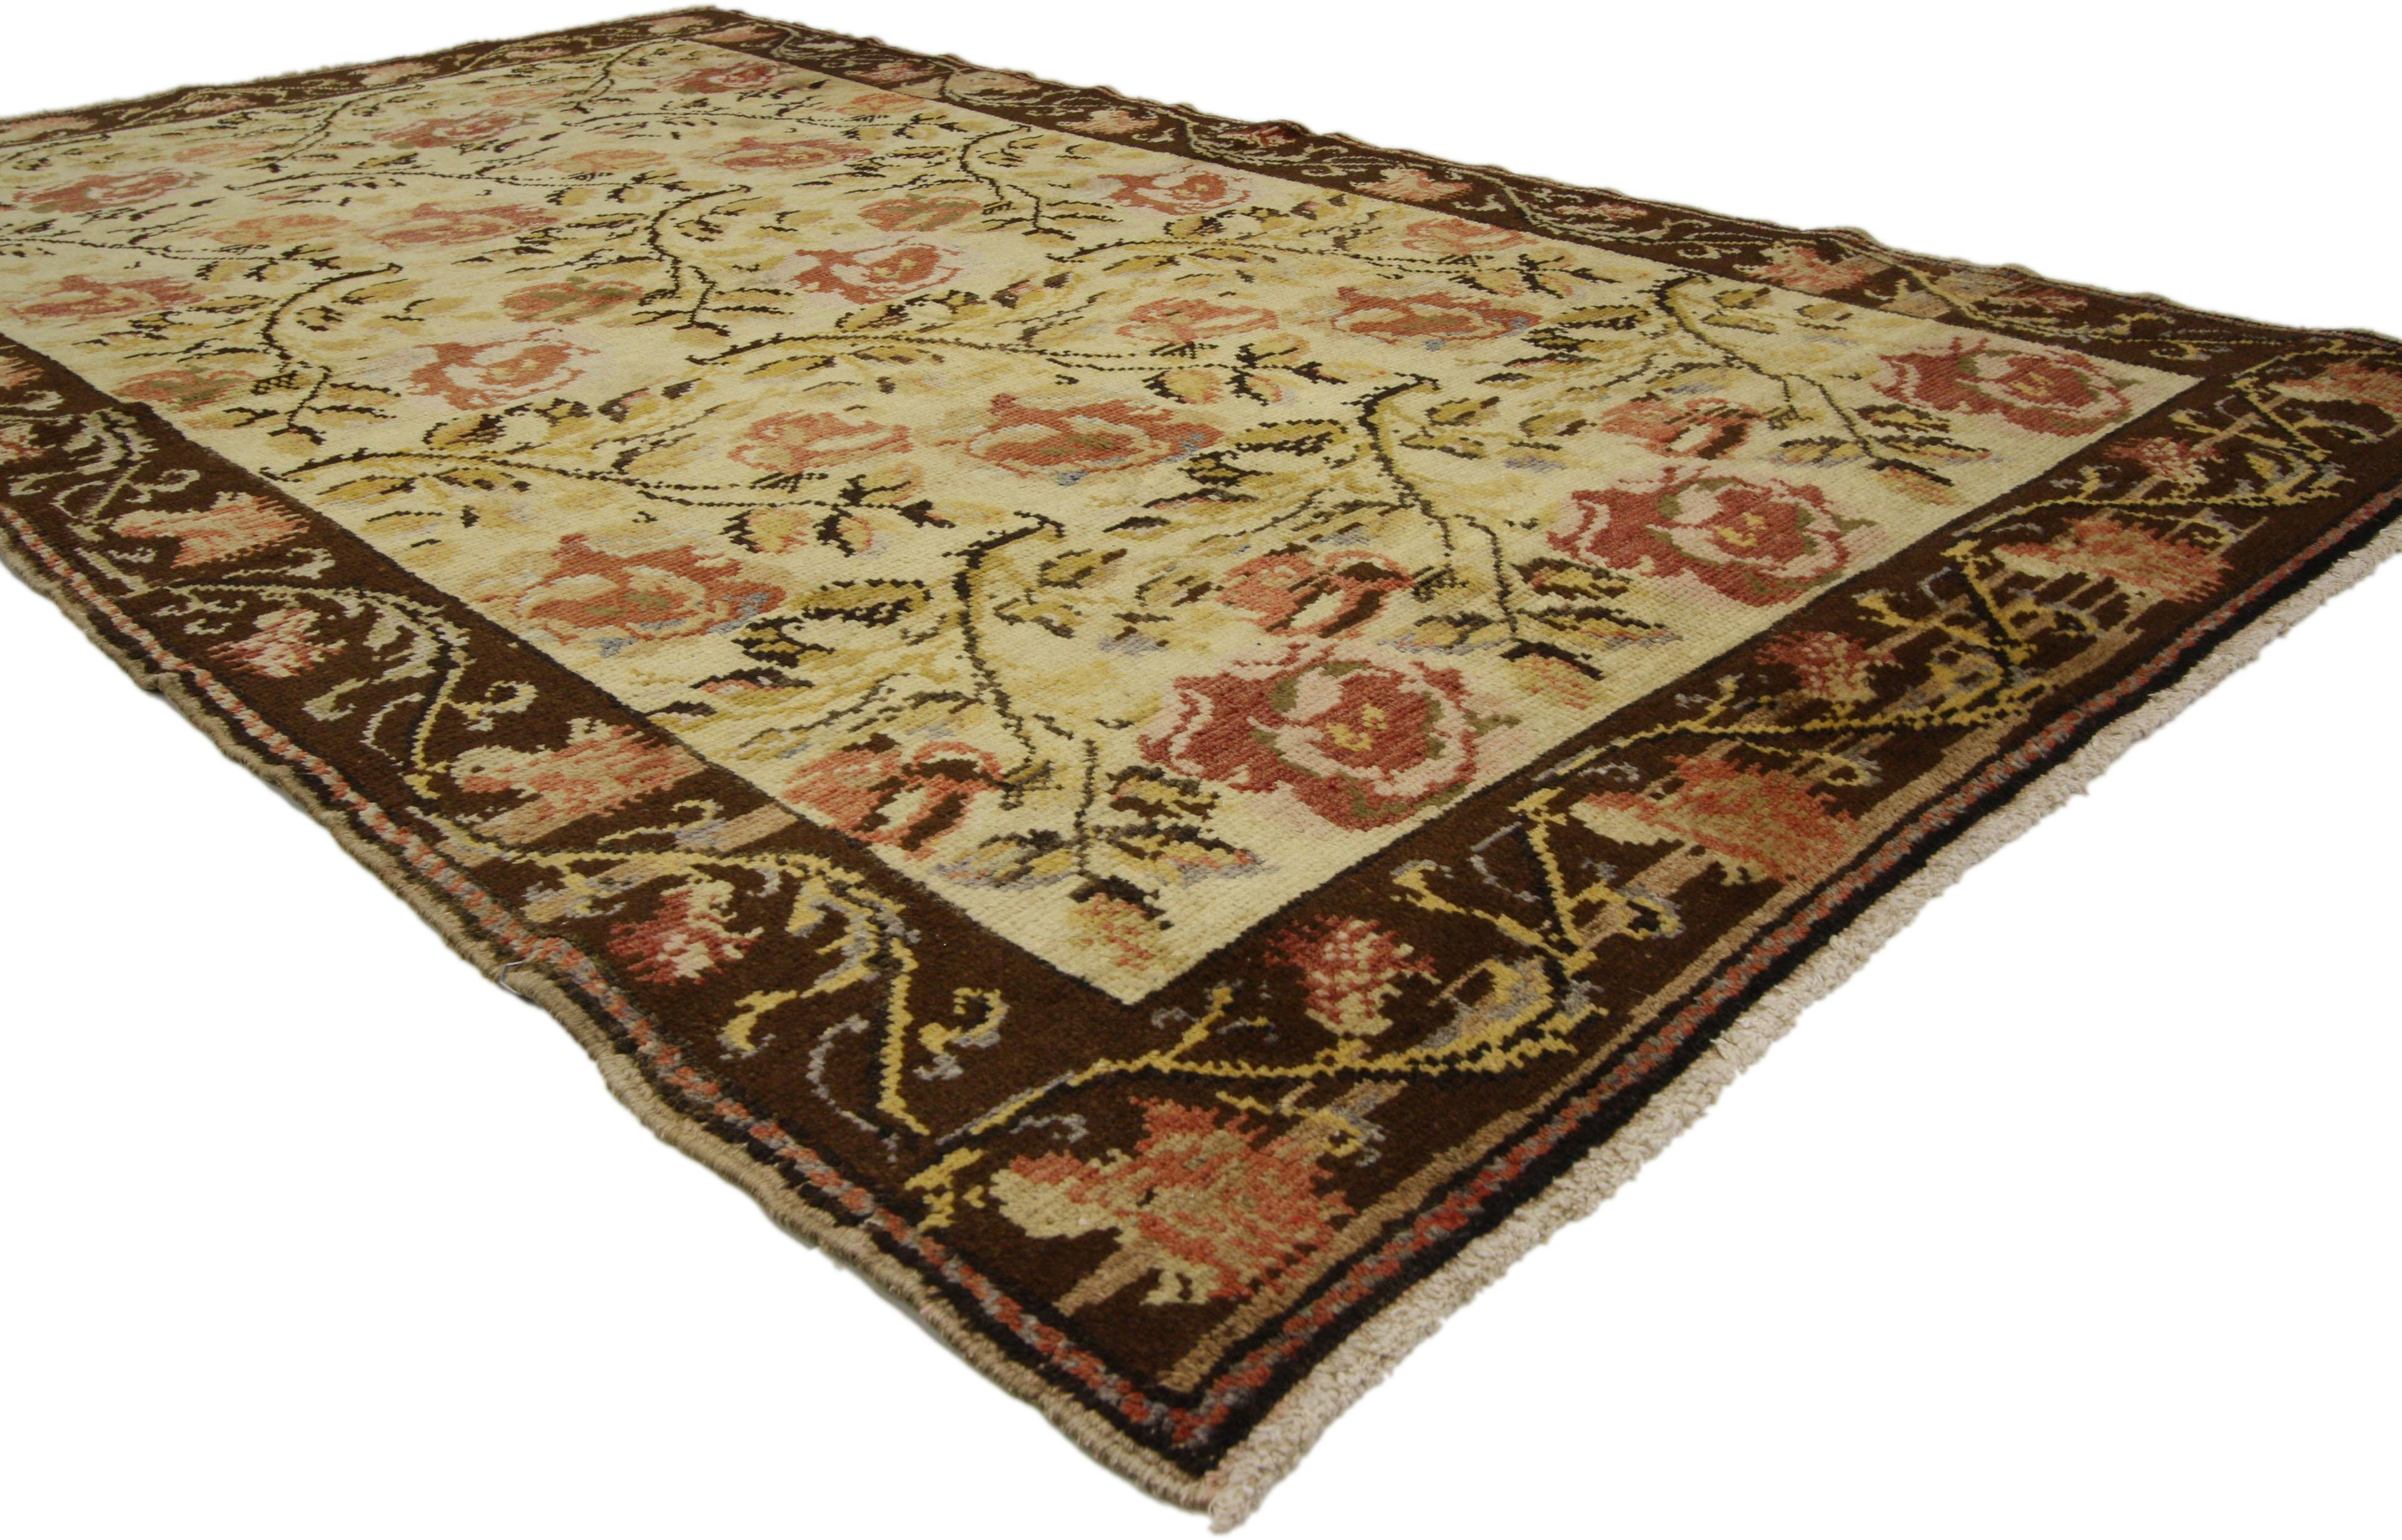 50093, Vintage Oushak Rug with Traditional English Country Garden Design 04'00 x 07'00. This hand-knotted wool vintage Oushak features an allover garden design composed of red and dusty pink roses on a warm beige field. Roses bloom from chocolate